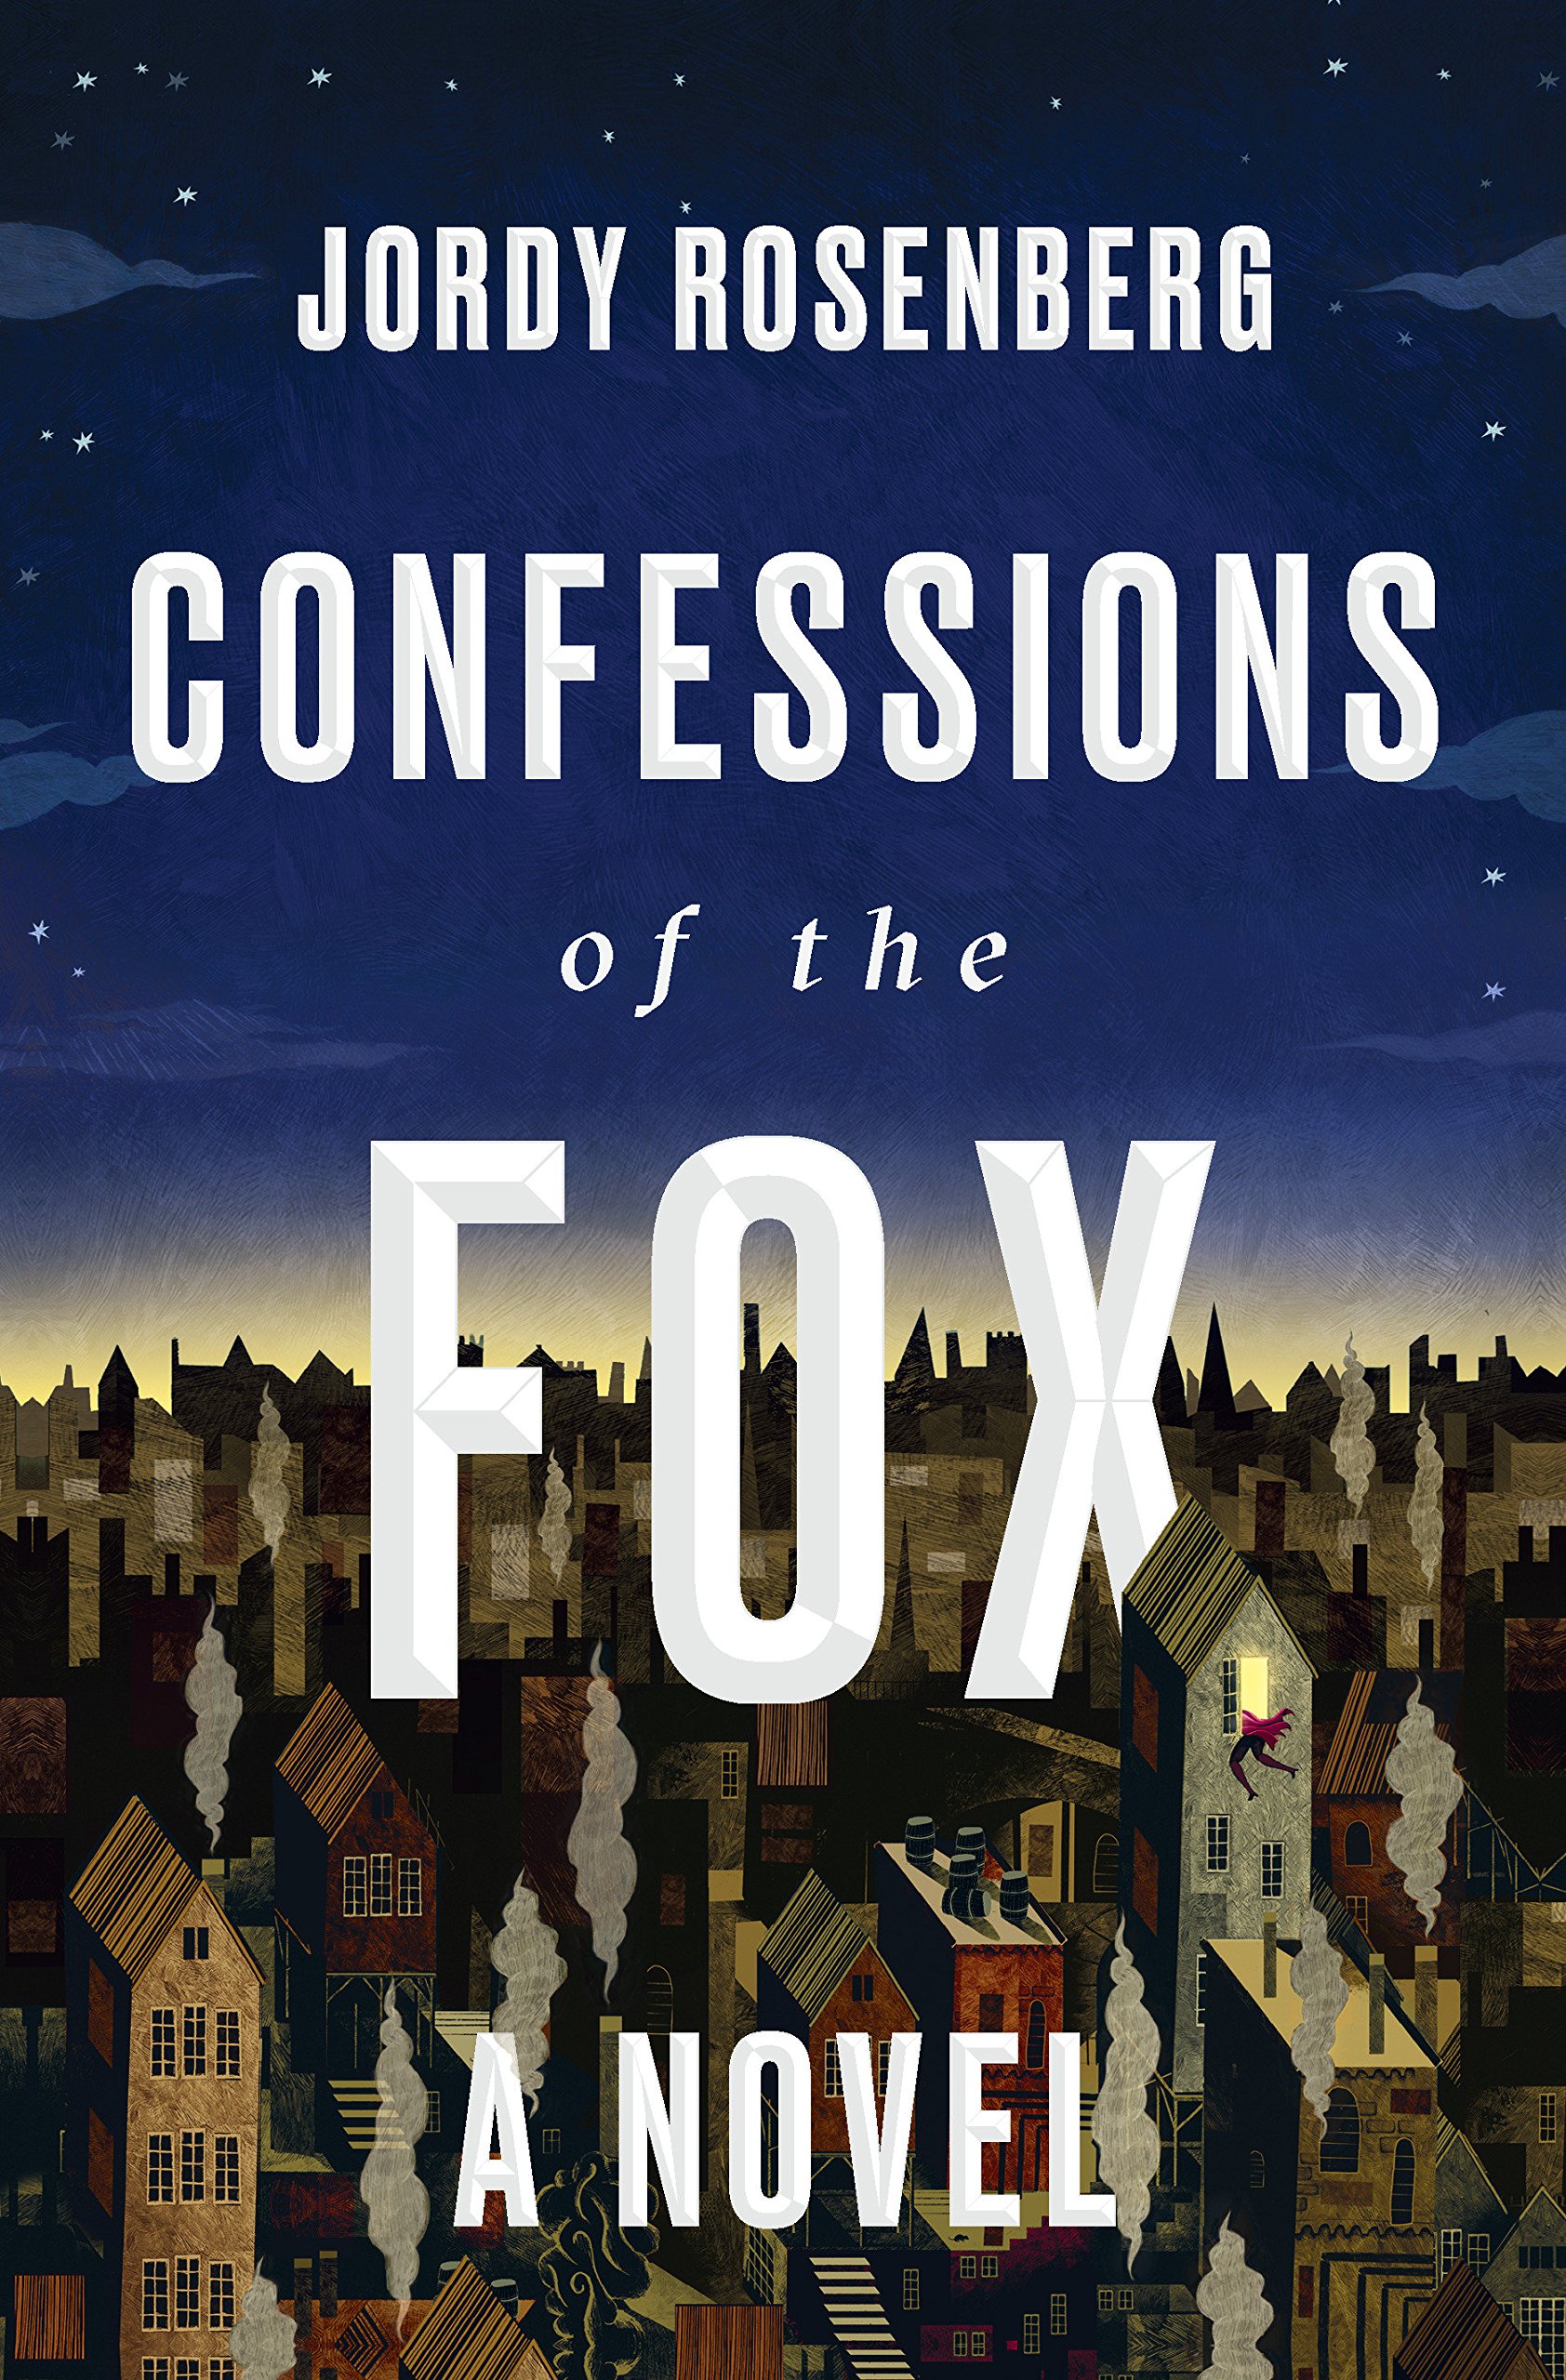 The Confessions of the Fox book jacket